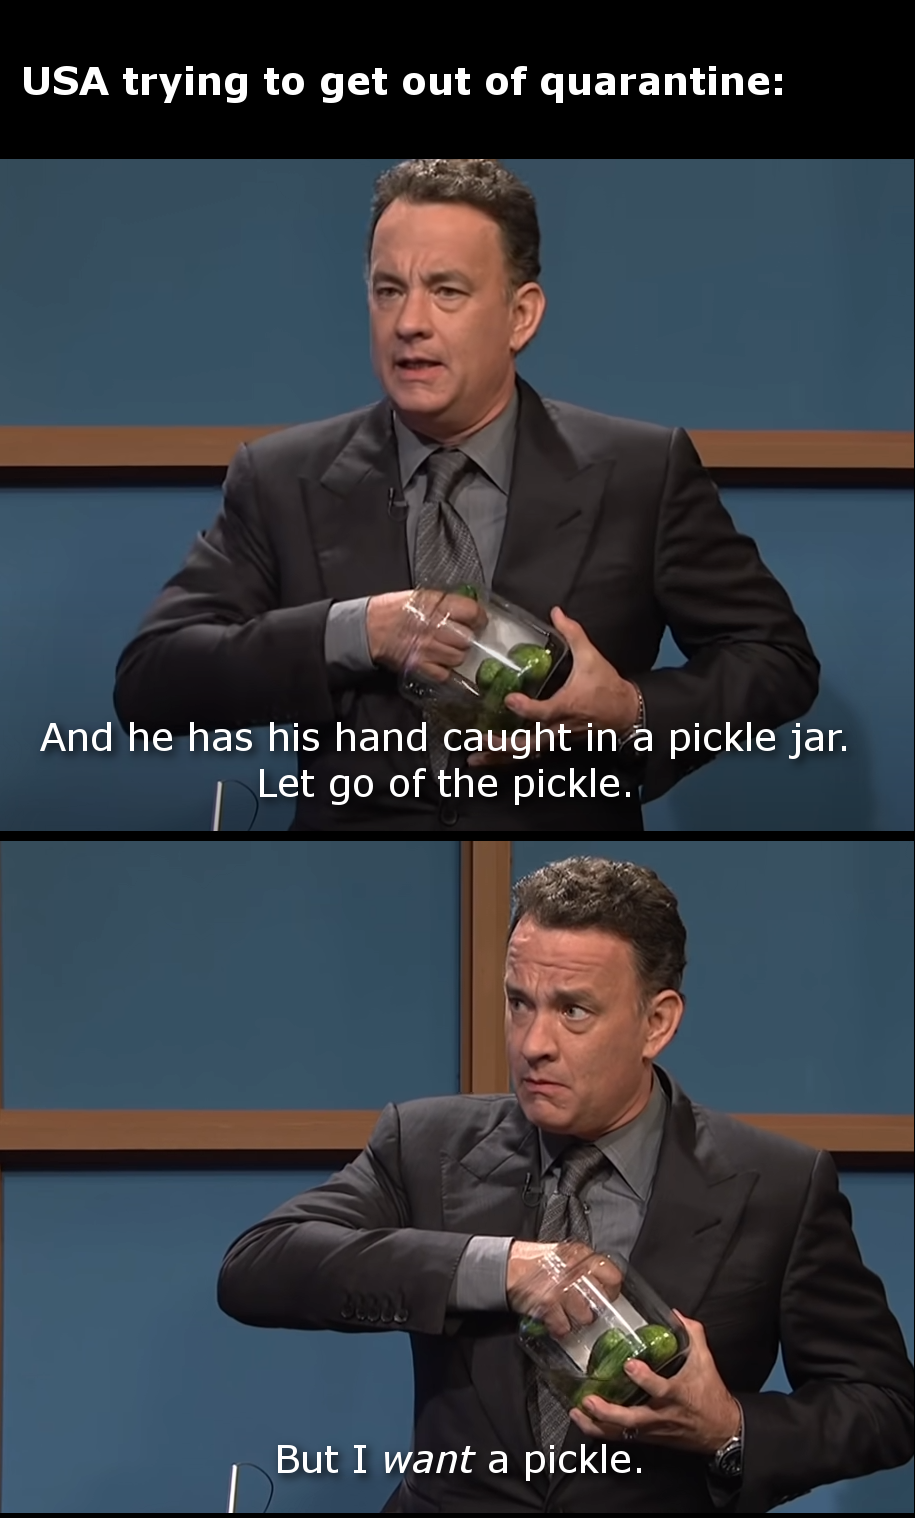 Won't somebody please think of the pickles?